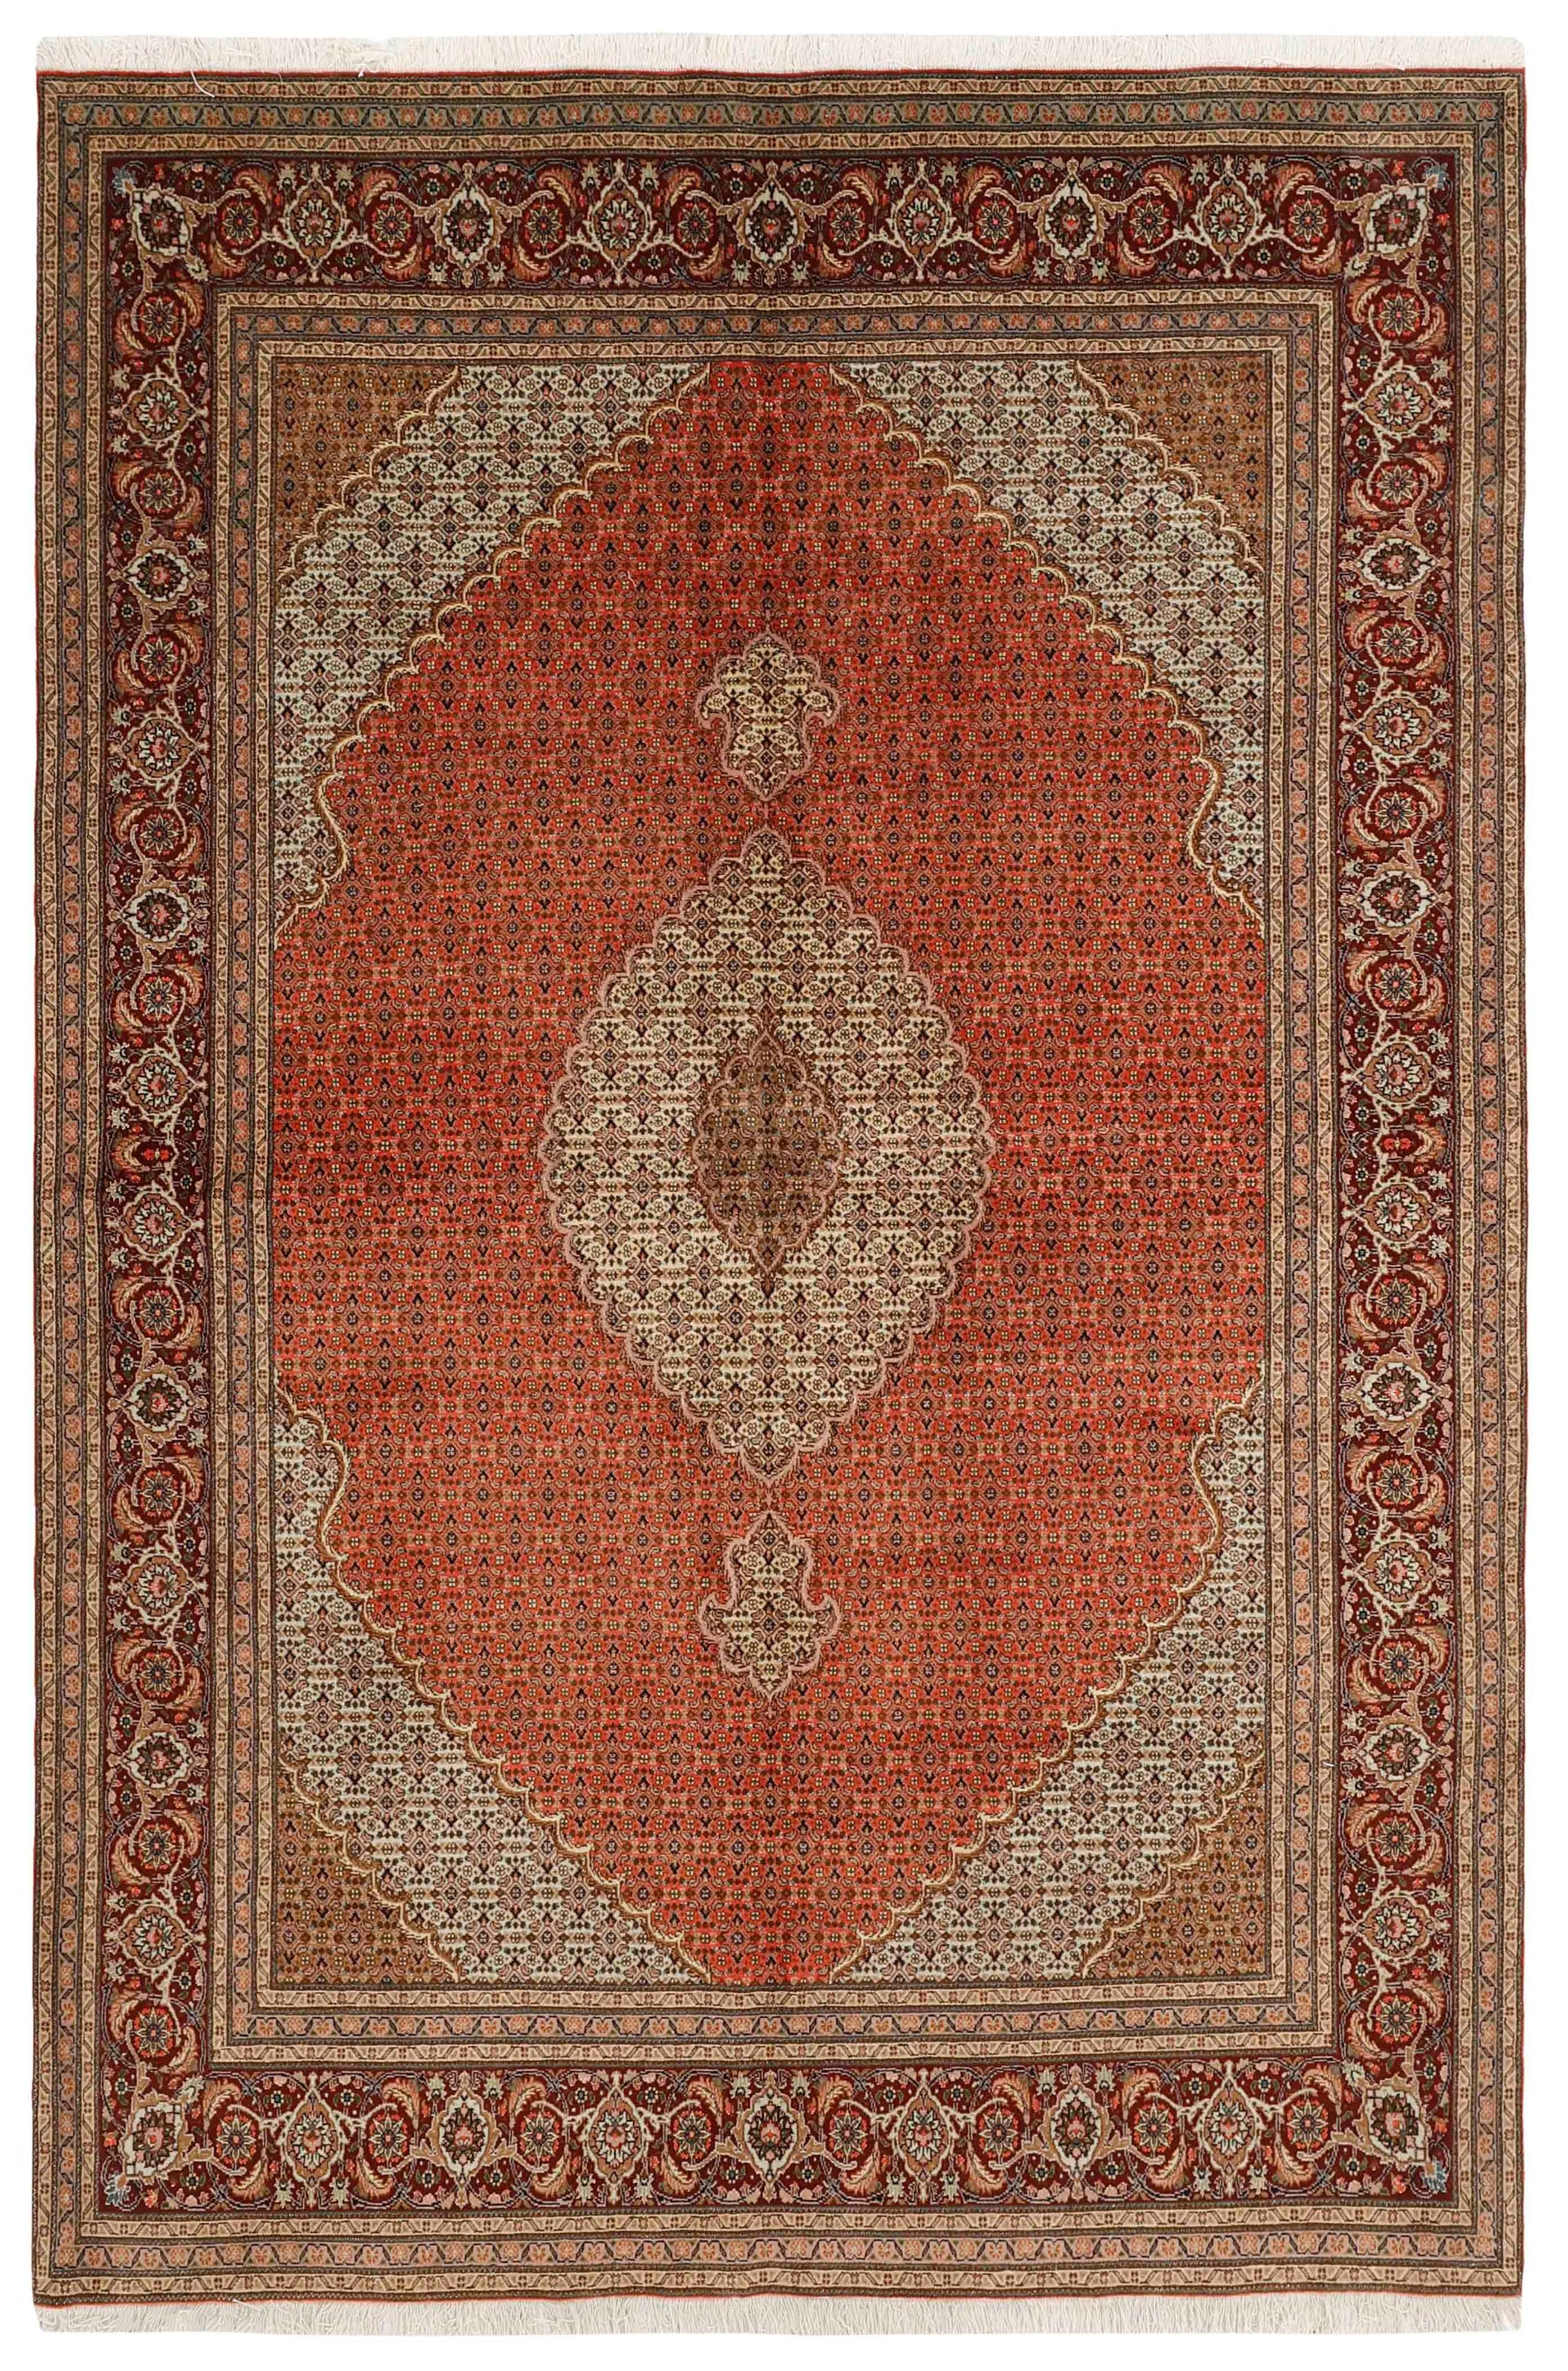 Authentic persian rug with traditional floral design in red, black and beige